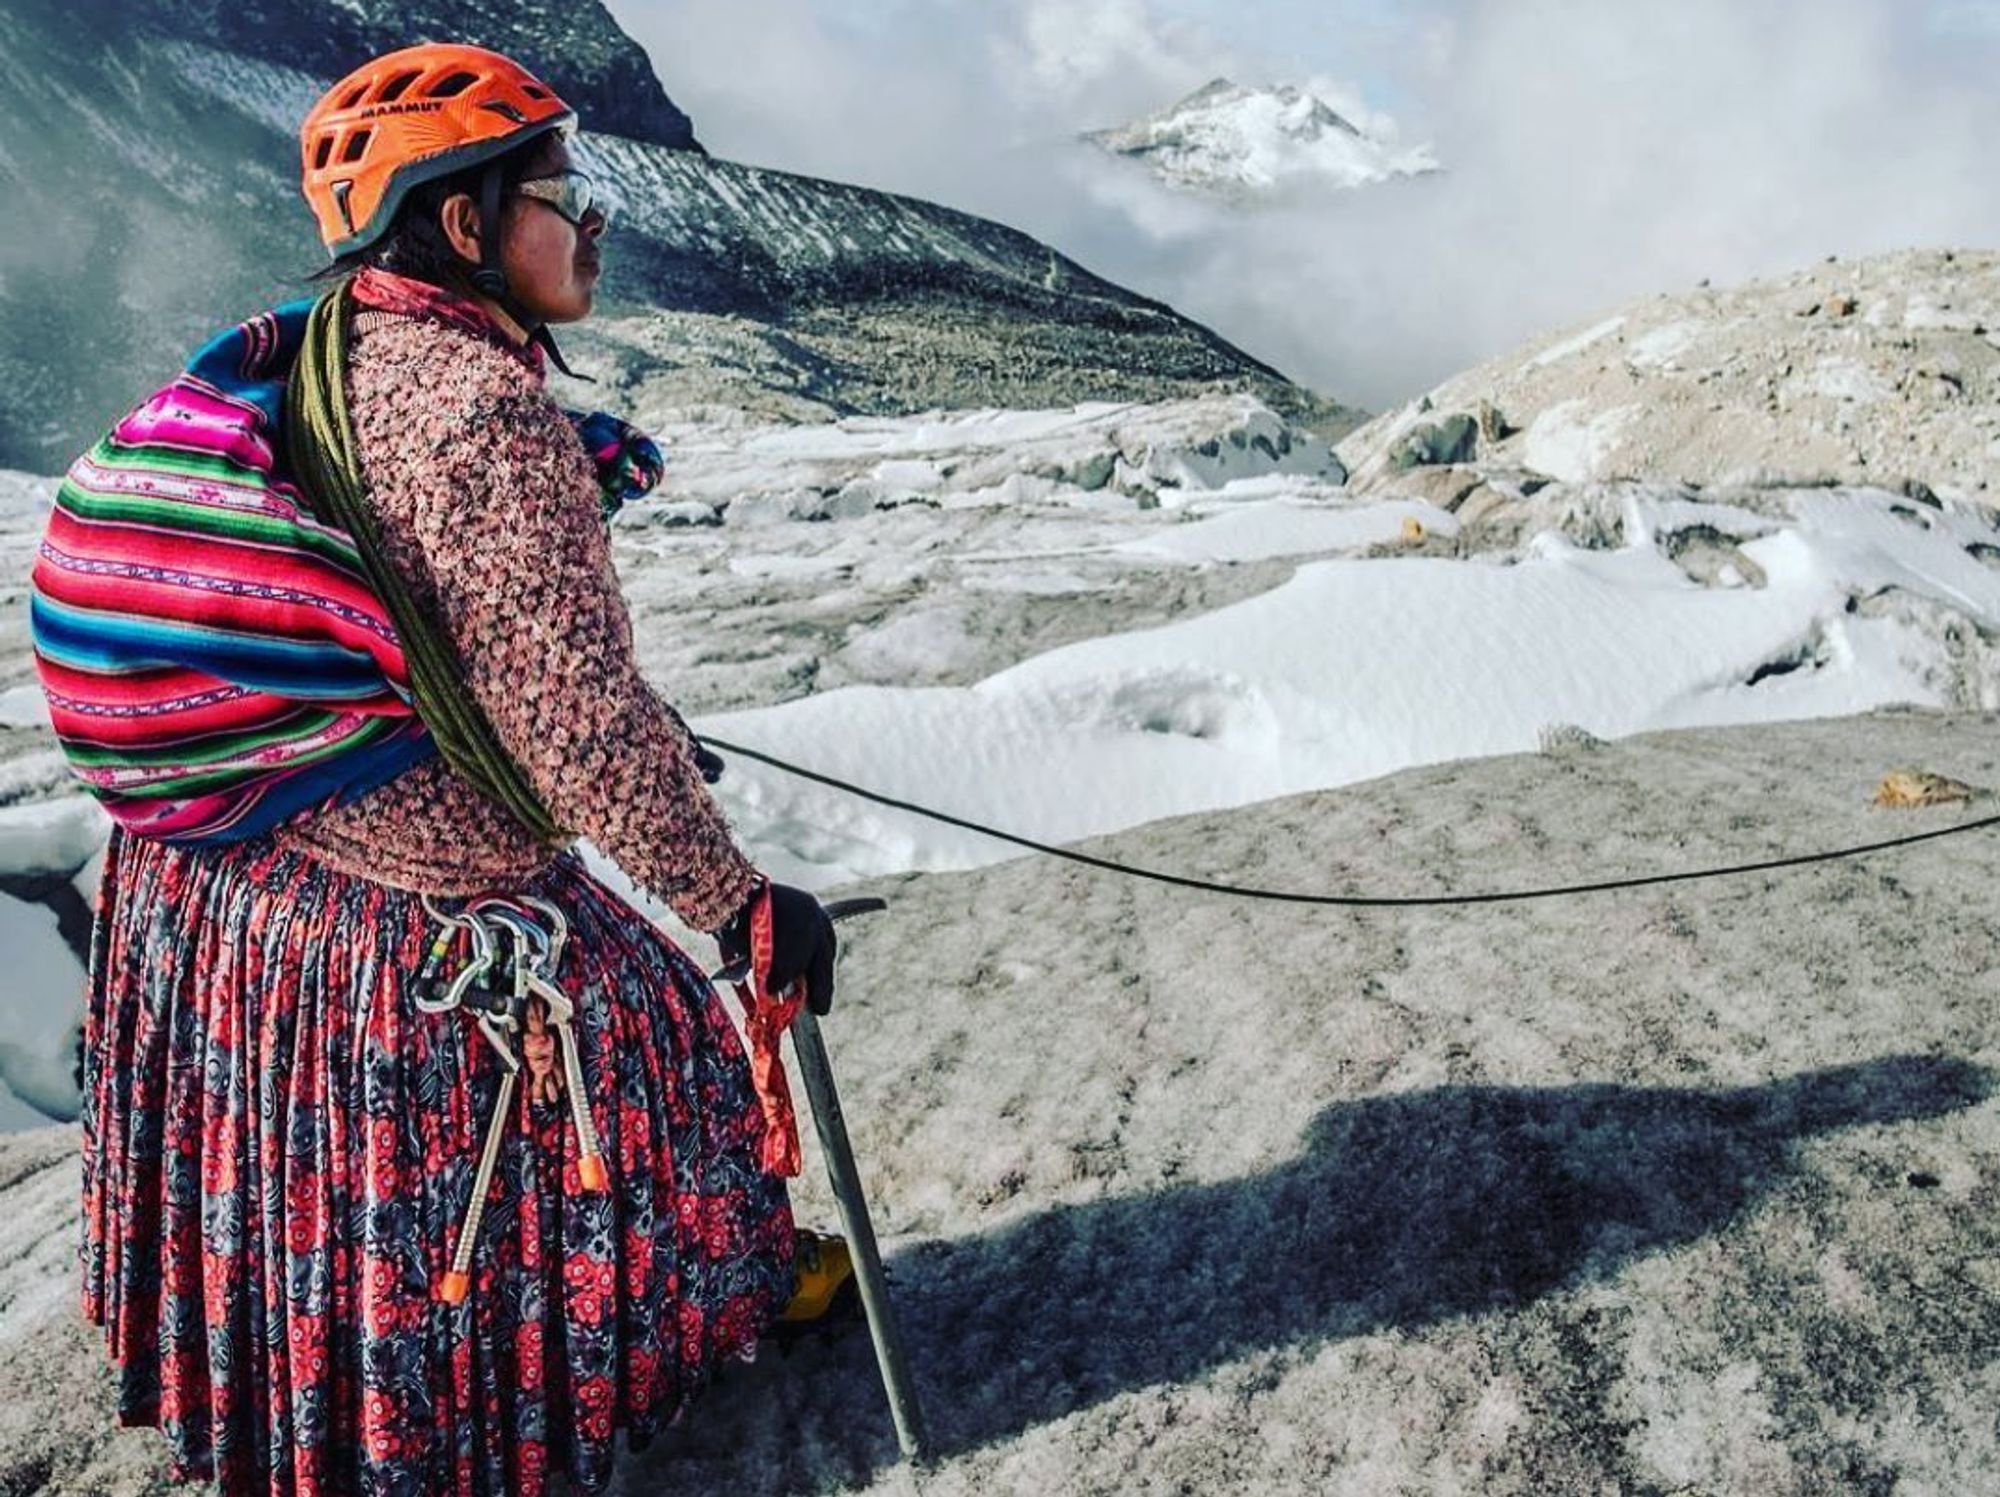 A Bolivian cholita, in traditional attire, admiring the mountain landscape during a climbing expedition.